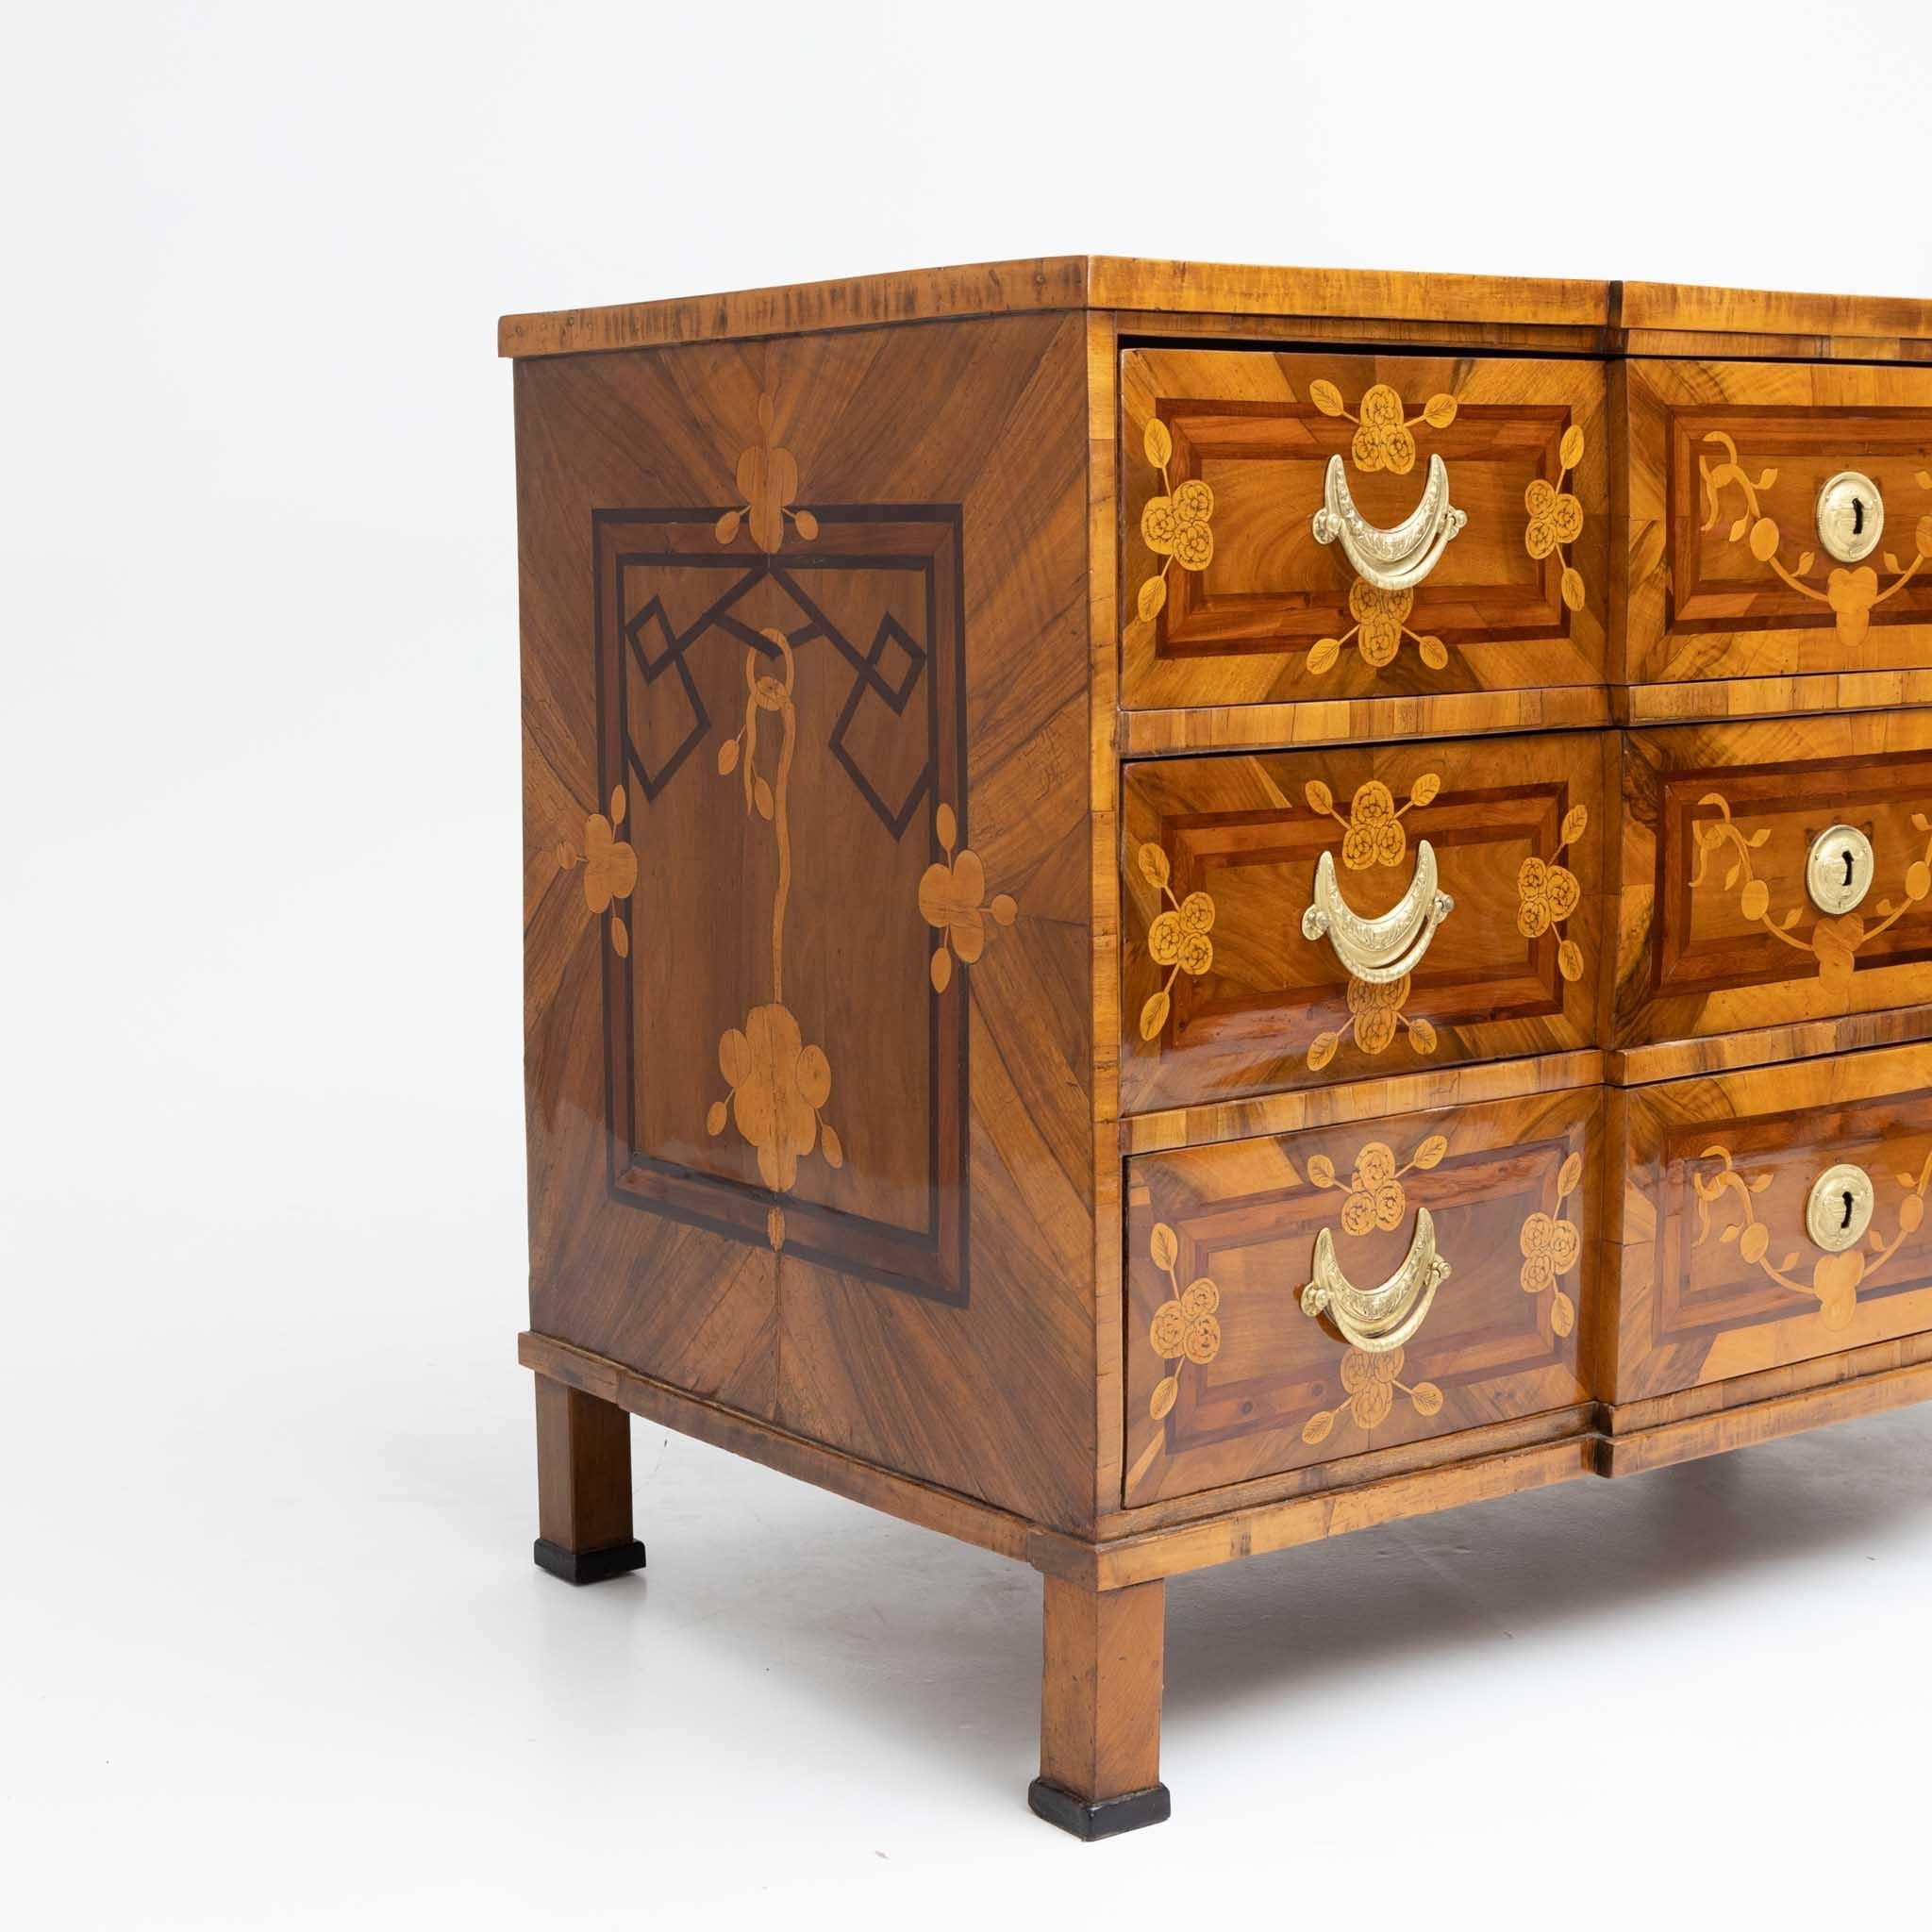 Louis Seize Marquetry Chest of Drawers, Walnut veneered, Late 18th Century For Sale 4